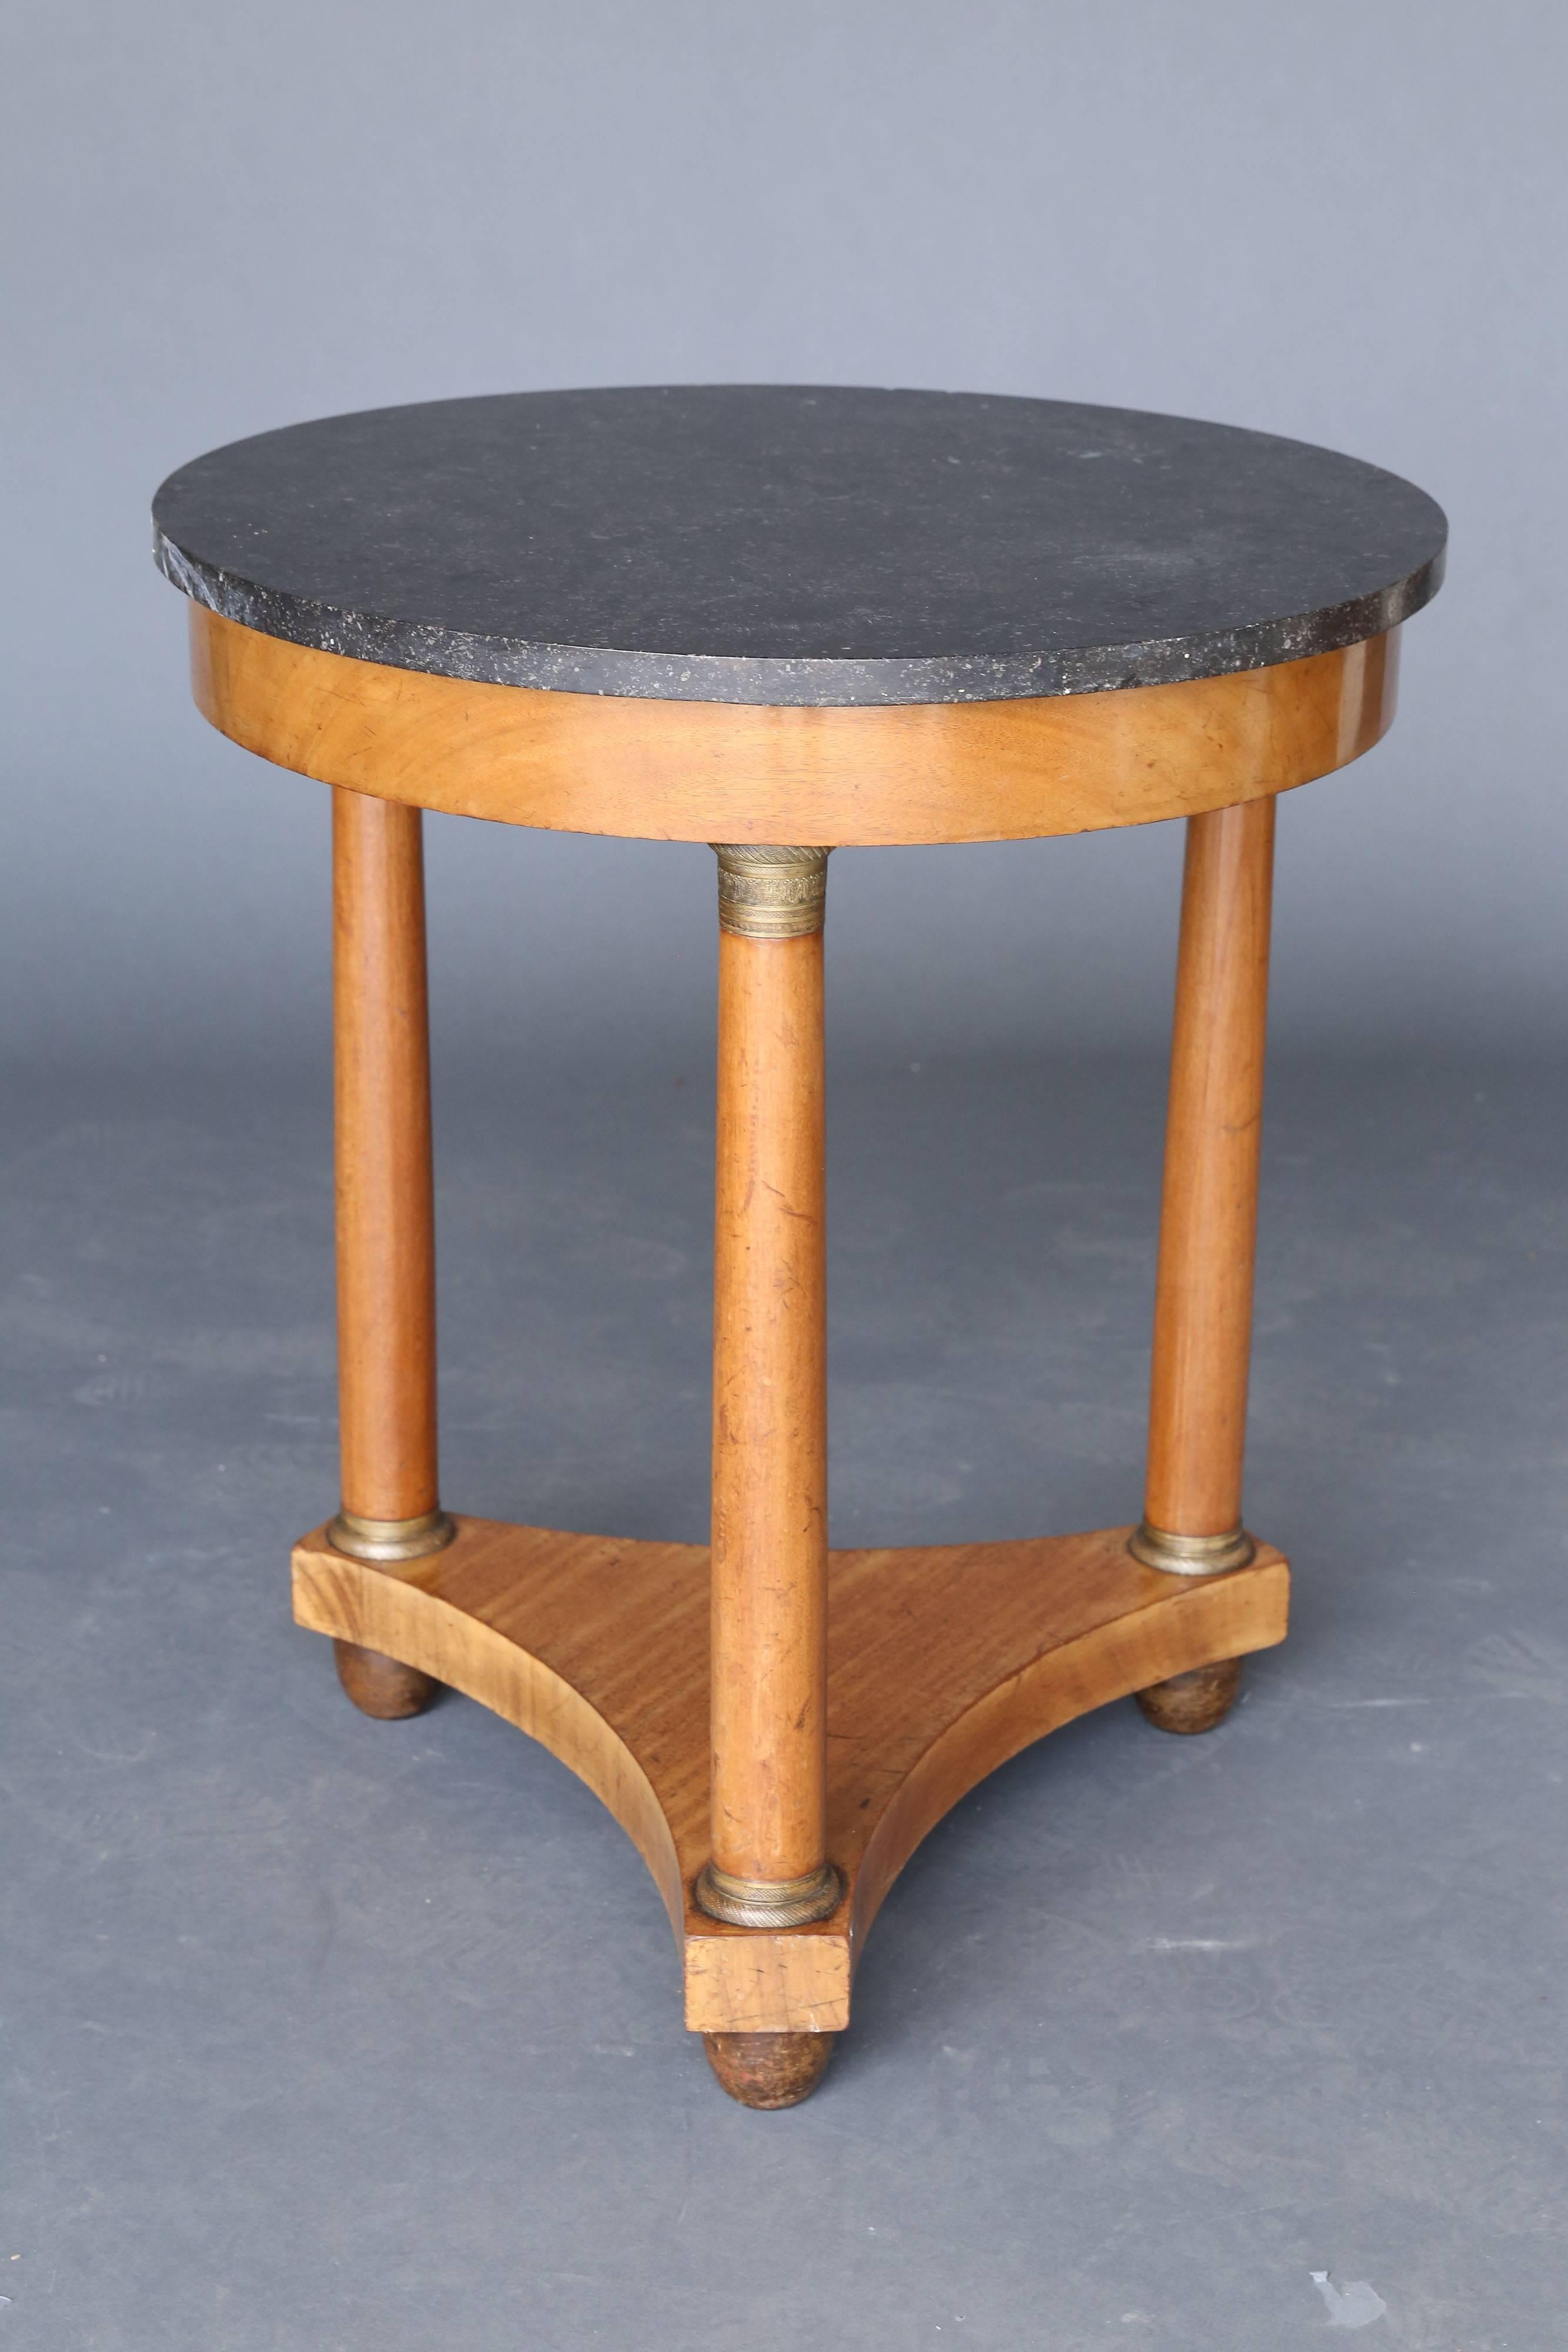 19th century Empire style marble table with a walnut base on three legs with metal detail. The legs rest on a thick wooden platform that in turn rests on three rounded feet under each of the columns.